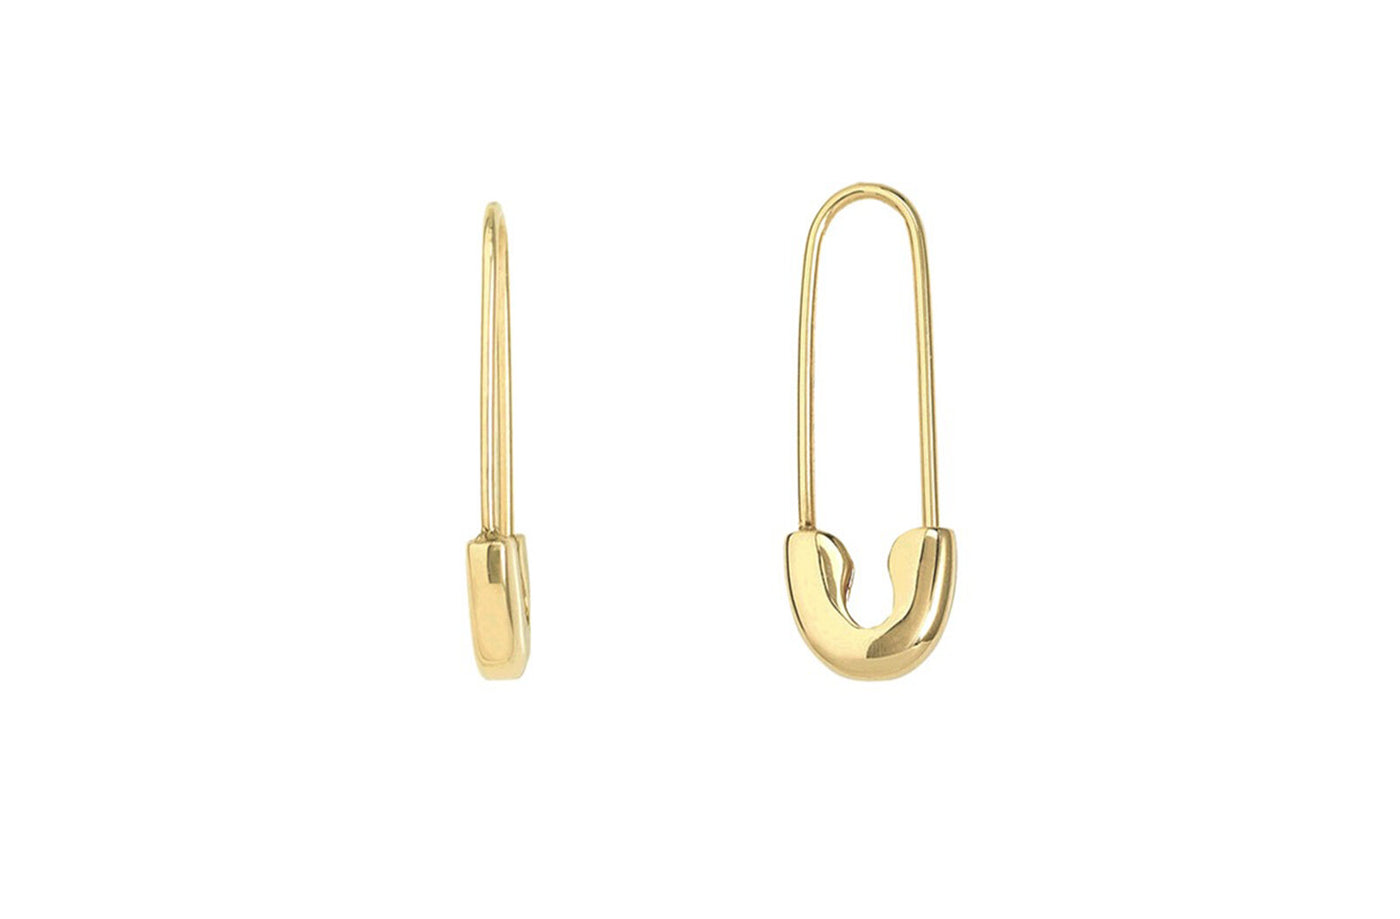 Safety Pin Threader Earrings in Yellow Gold